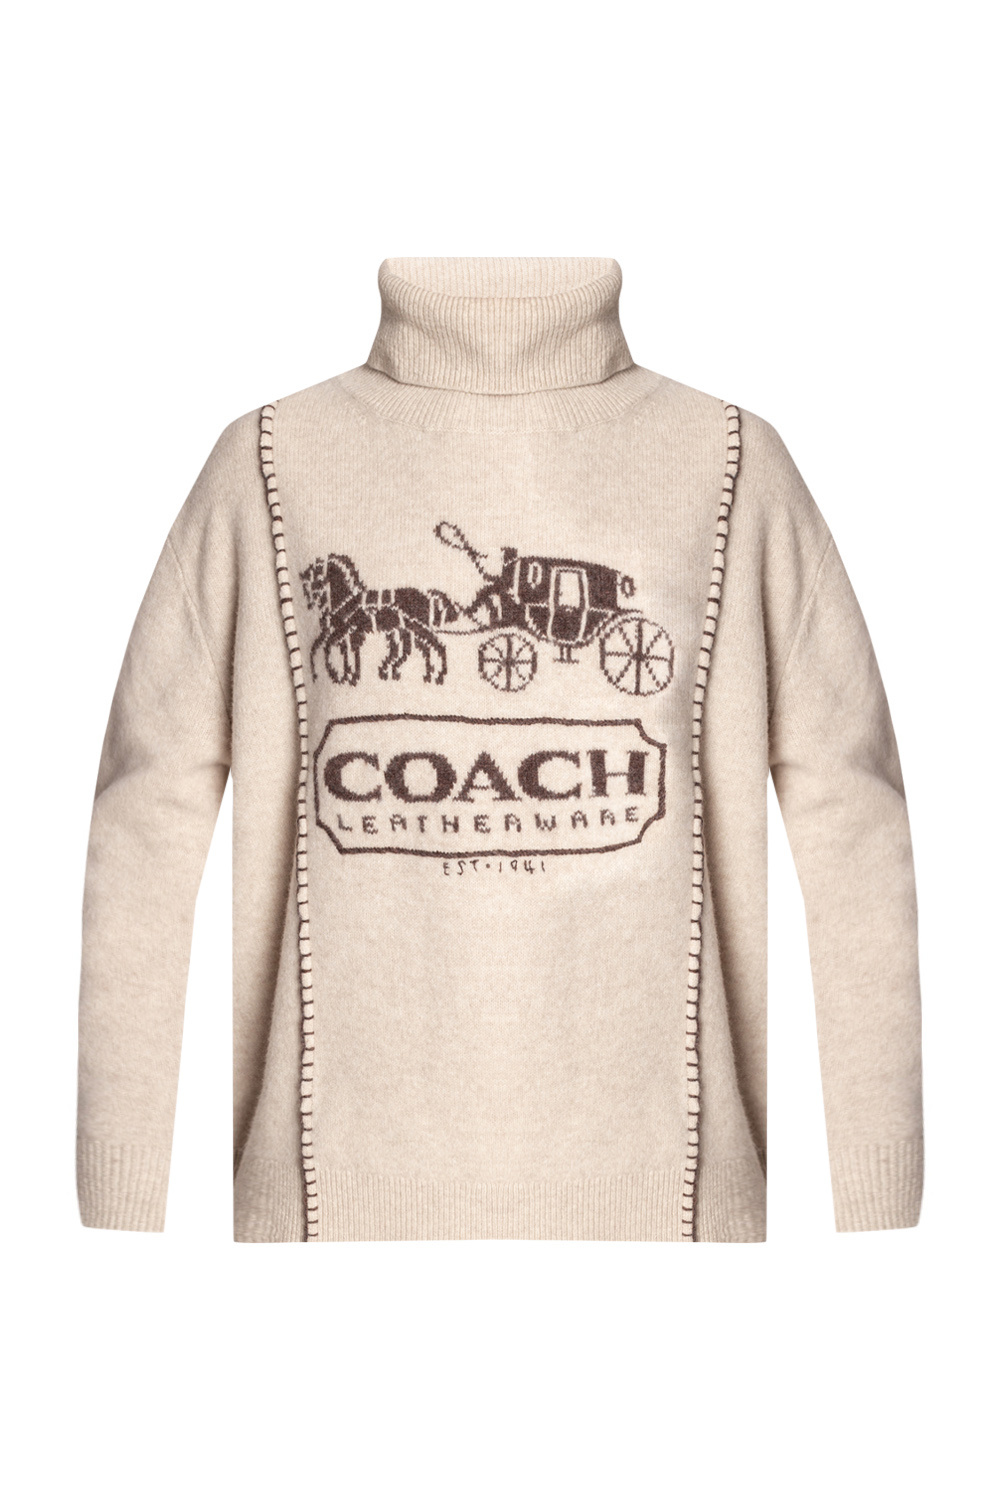 IetpShops Congo - Turtleneck sweater with logo weeks Coach - weeks Coach  Cody whipstich shoulder bag